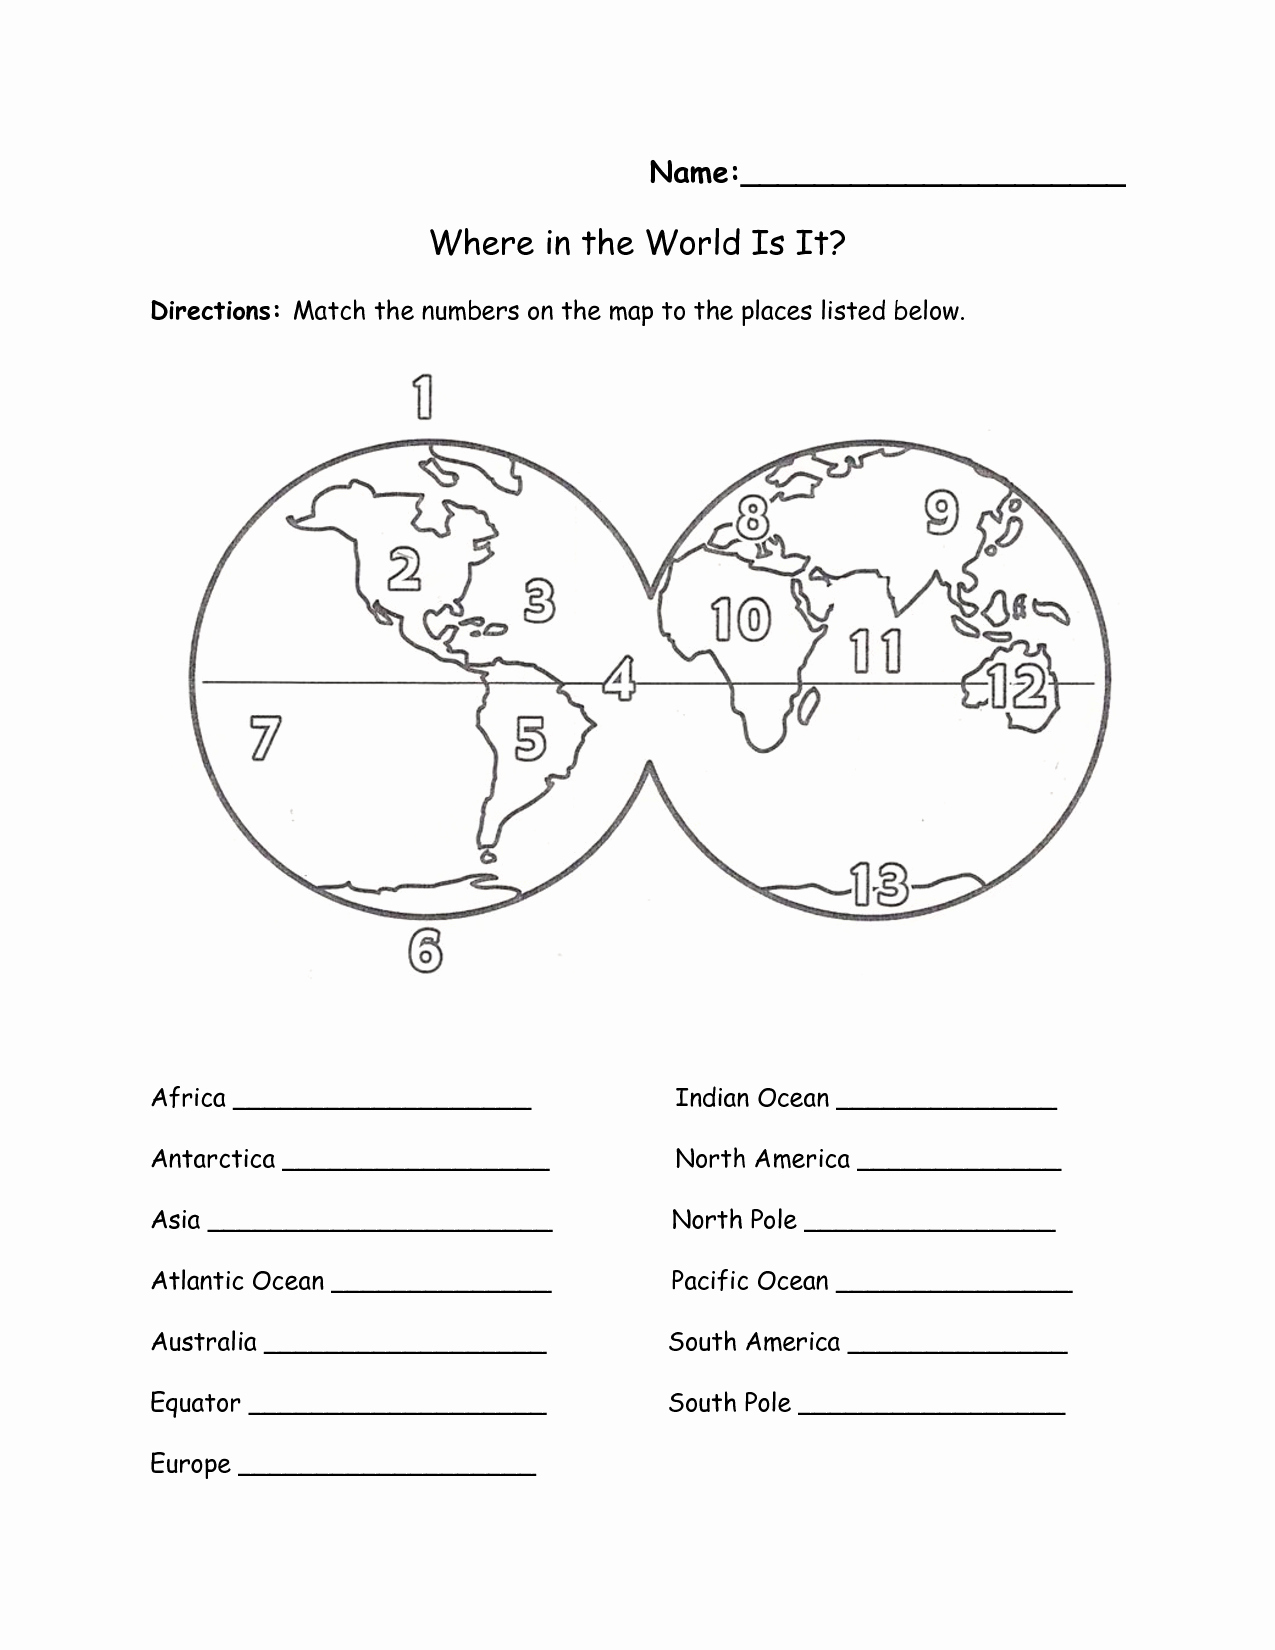 Continents and Oceans Worksheet Luxury Label Continents Oceans Worksheet Continents and Oceans